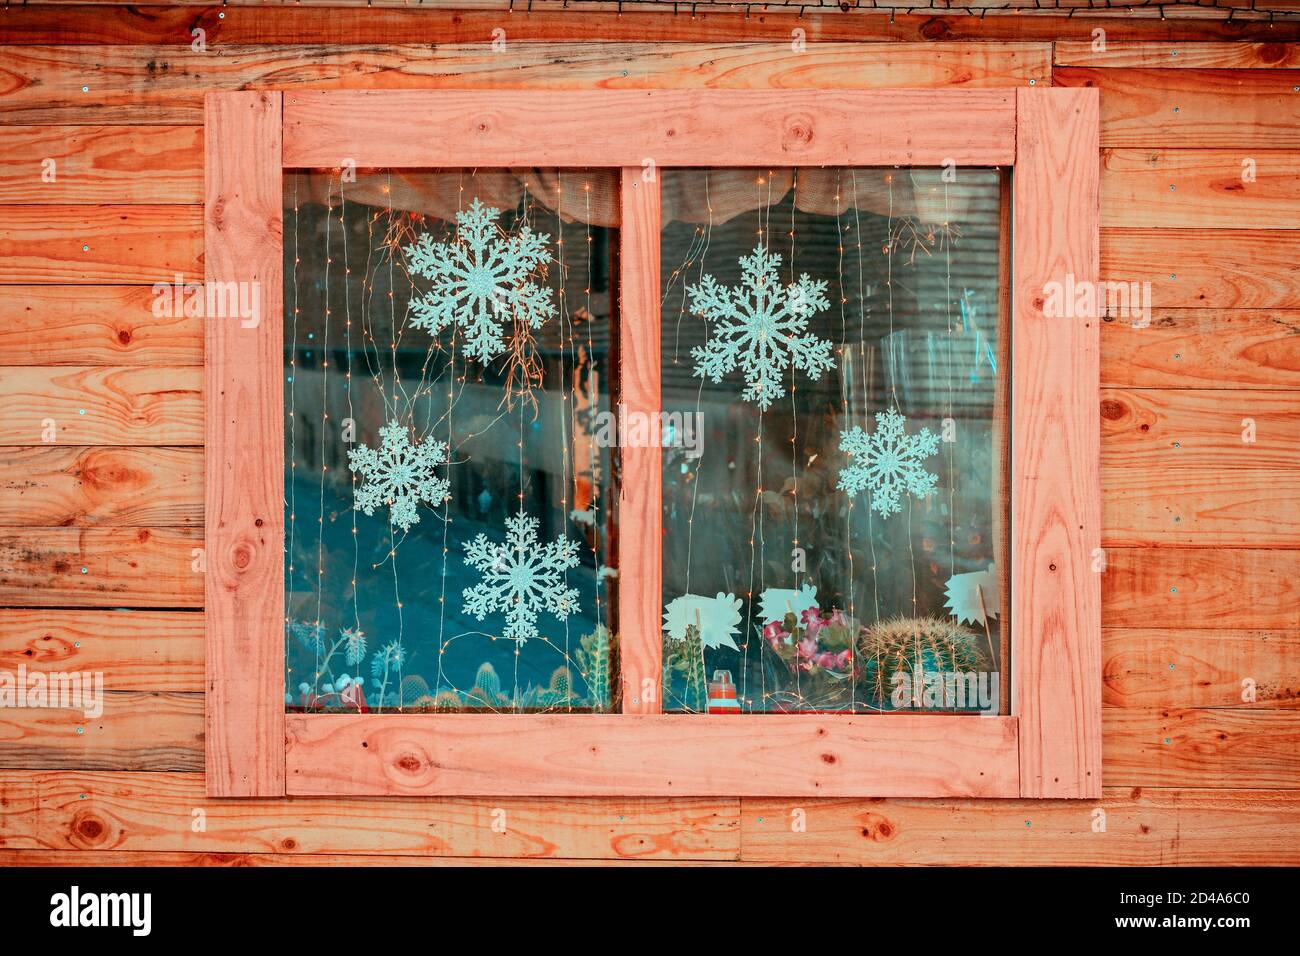 view of wooden facade with Window showing Christmas motifs Stock Photo